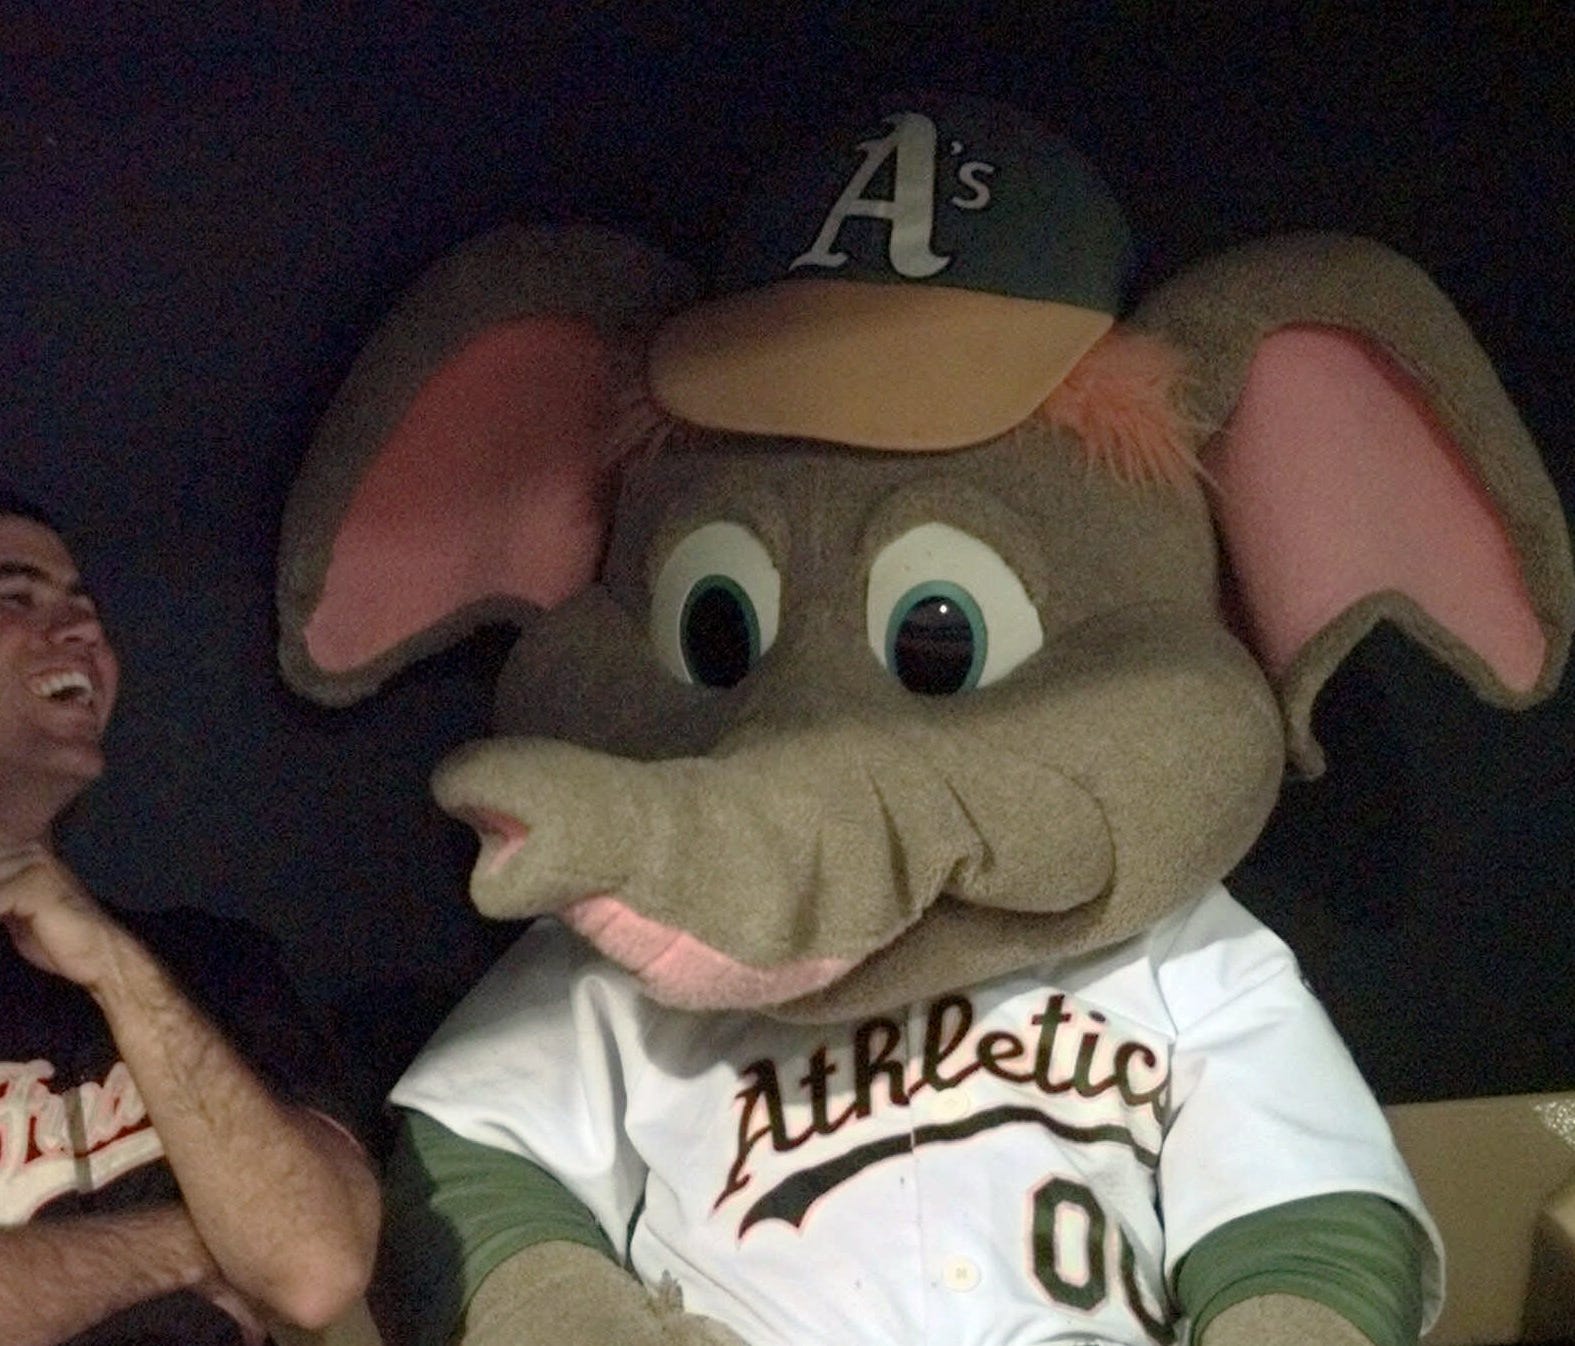 Stomper is the mascot of the Athletics.